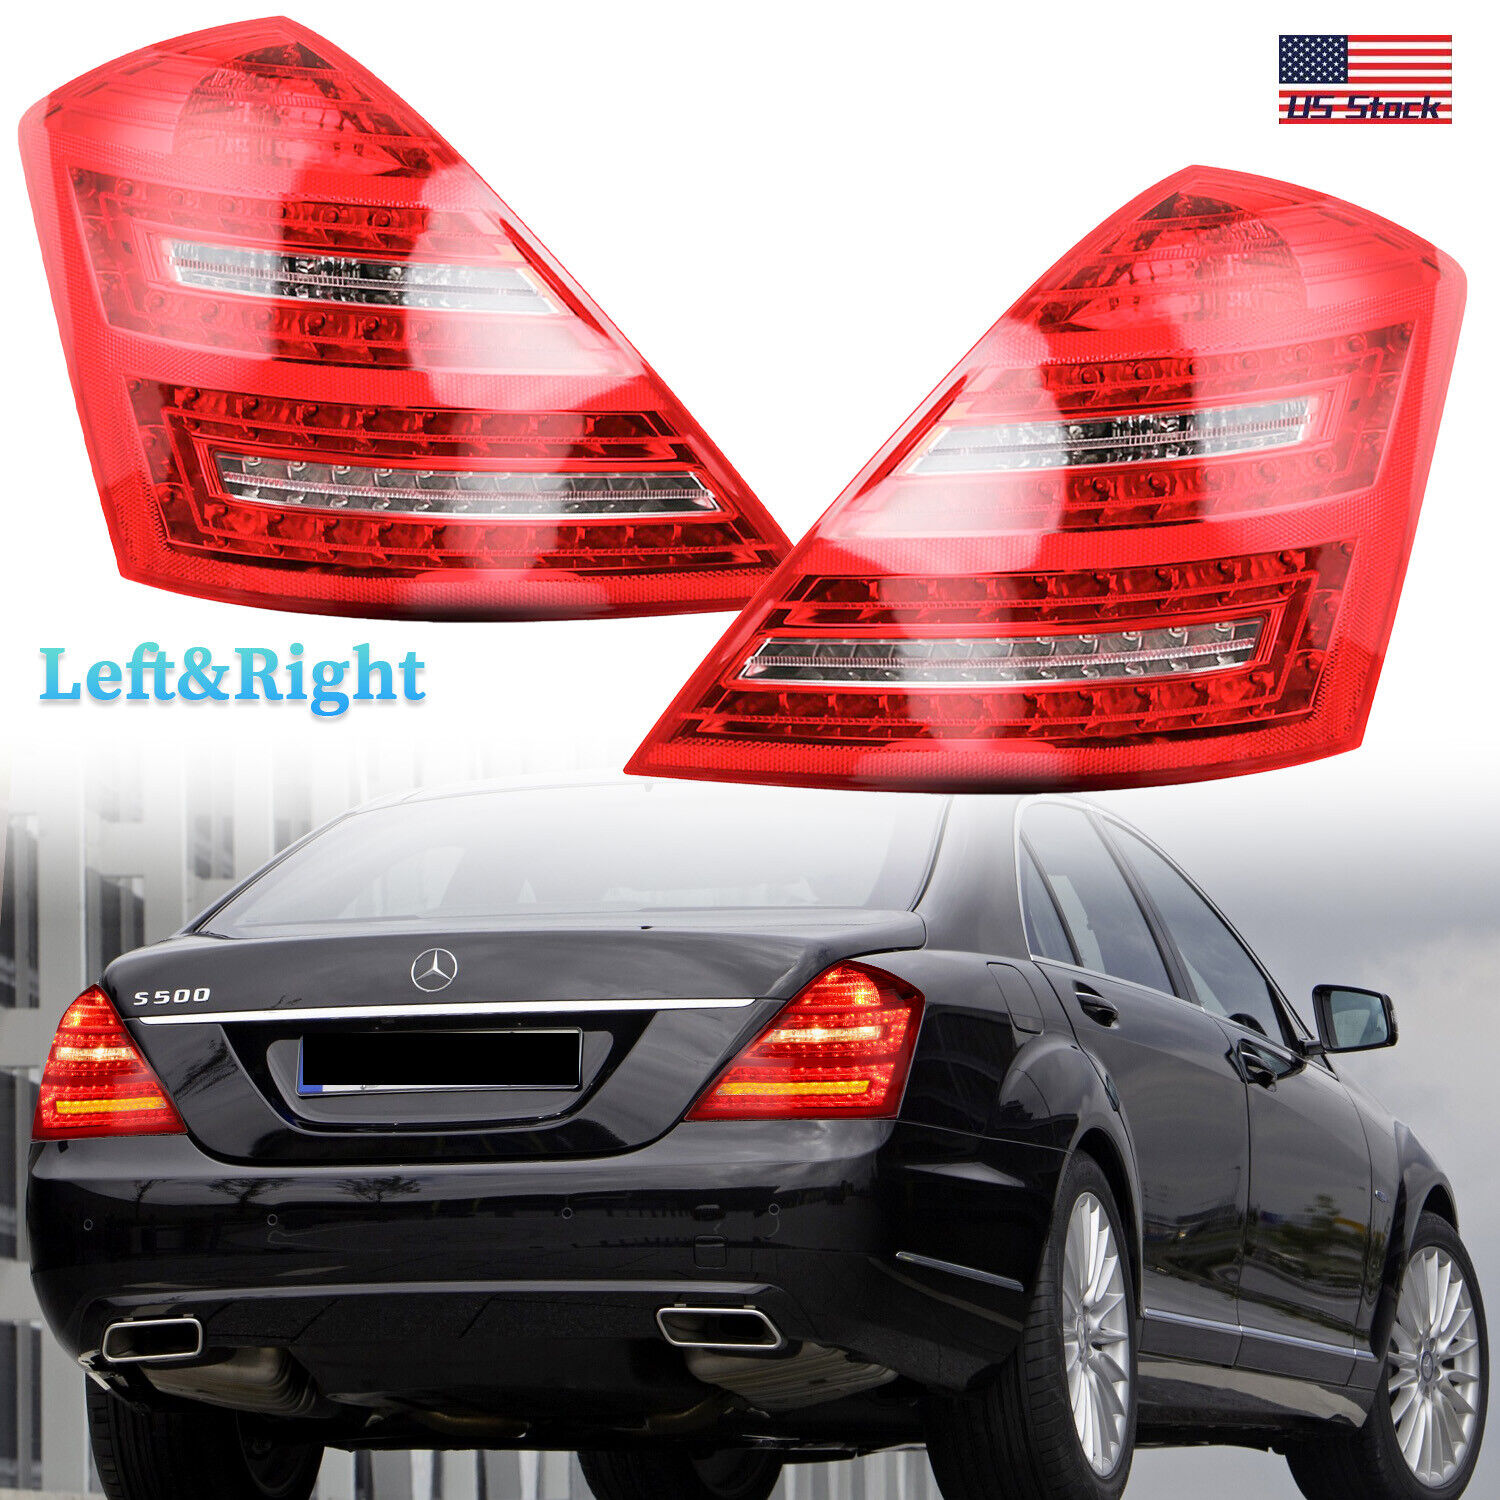 LH+RH Side Tail Lights For 2010 2011 2012 2013 Mercedes Benz W221 S600 S63 AMG